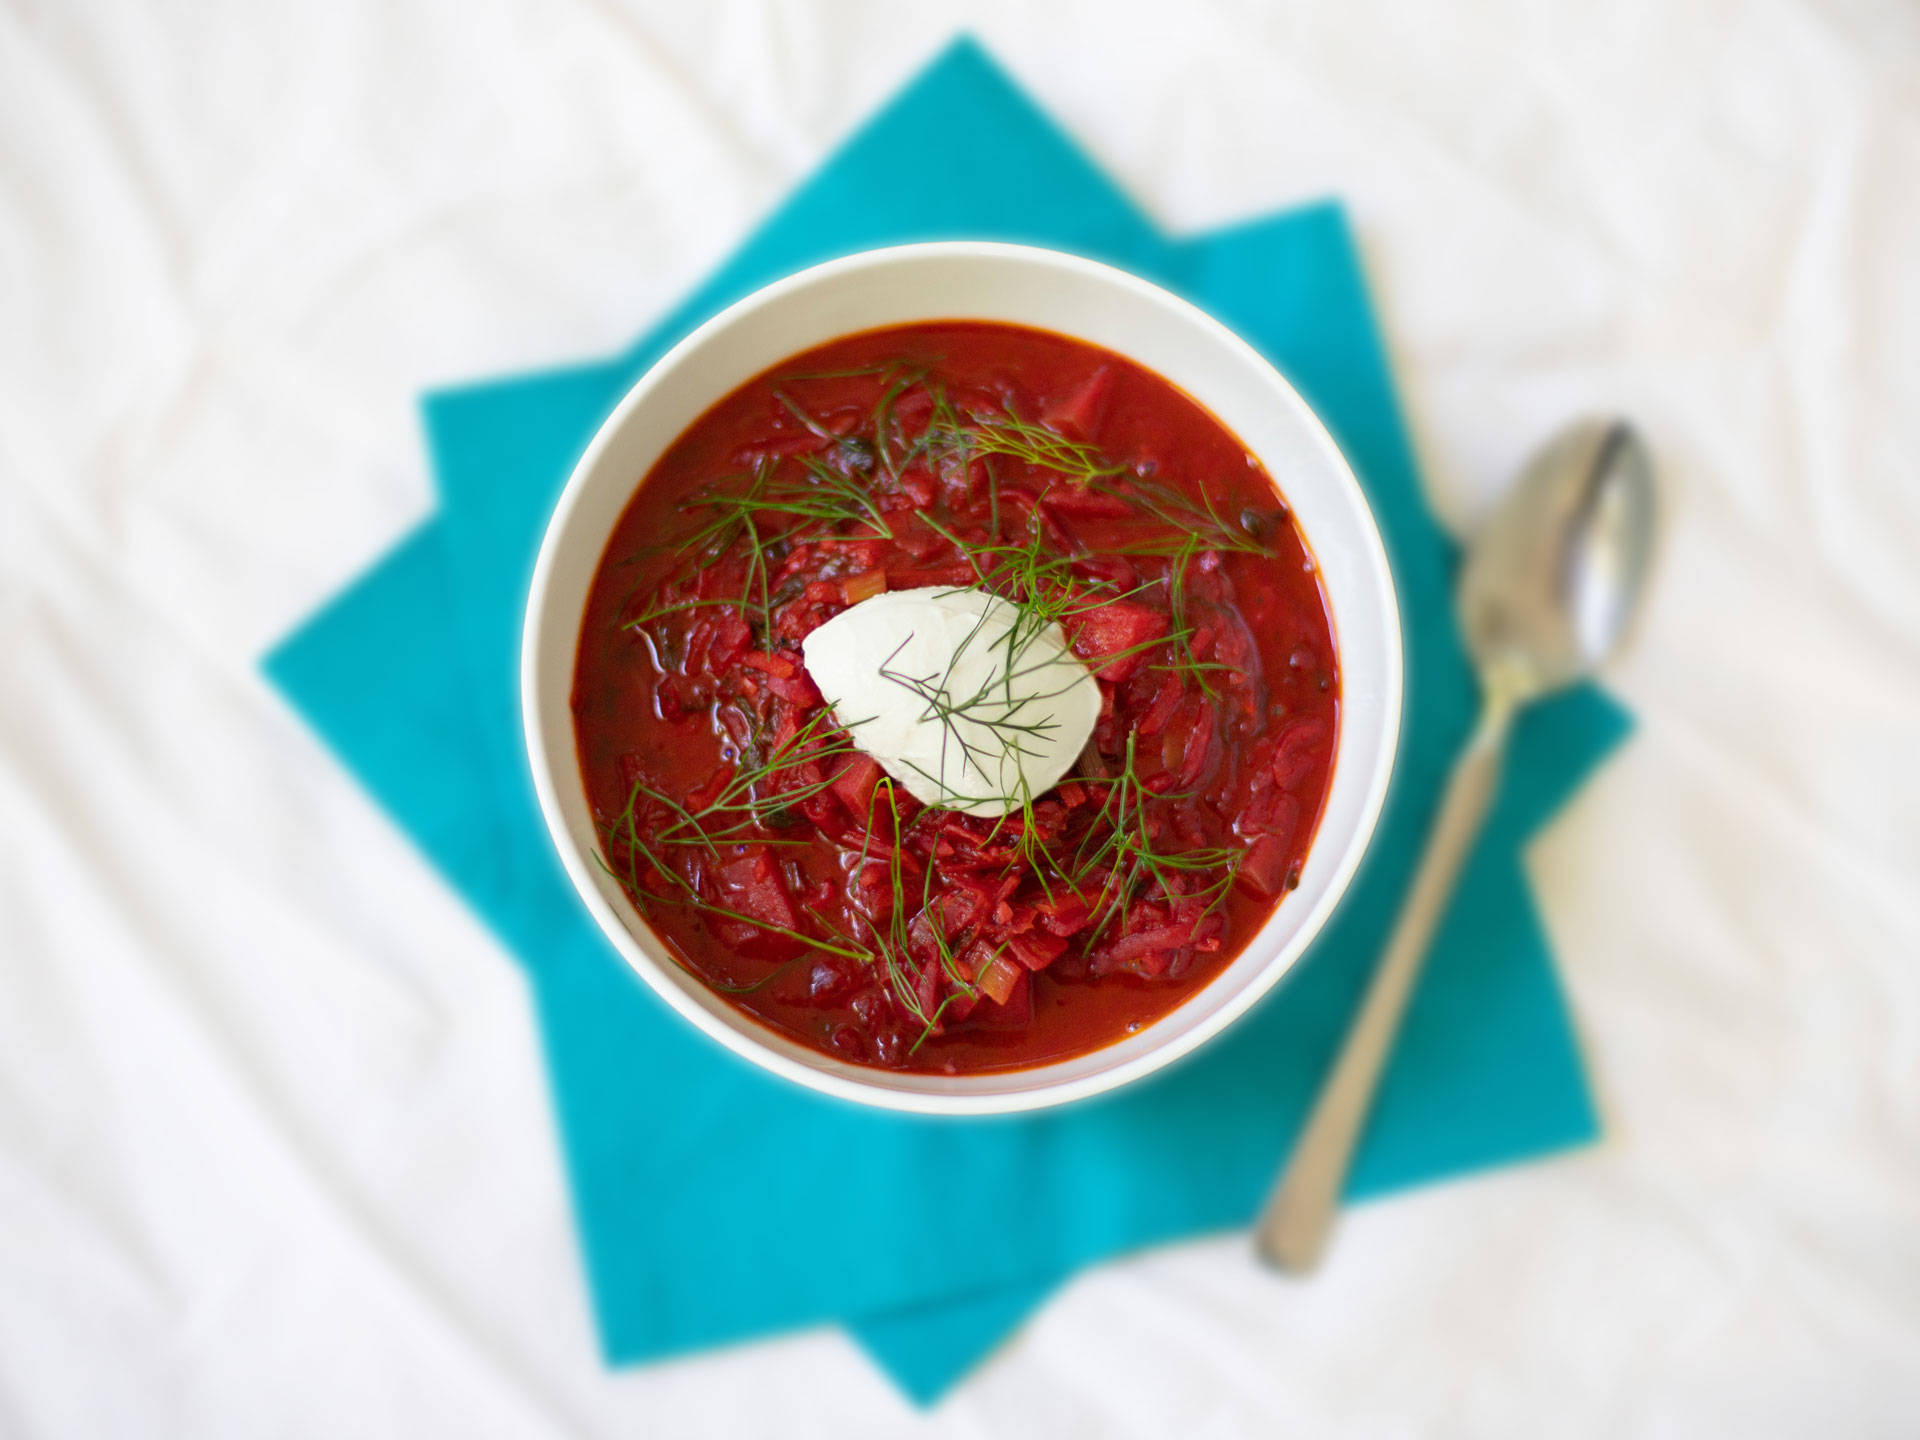 Hearty bowl of Borscht emboldened with zesty Cilantro Wallpaper